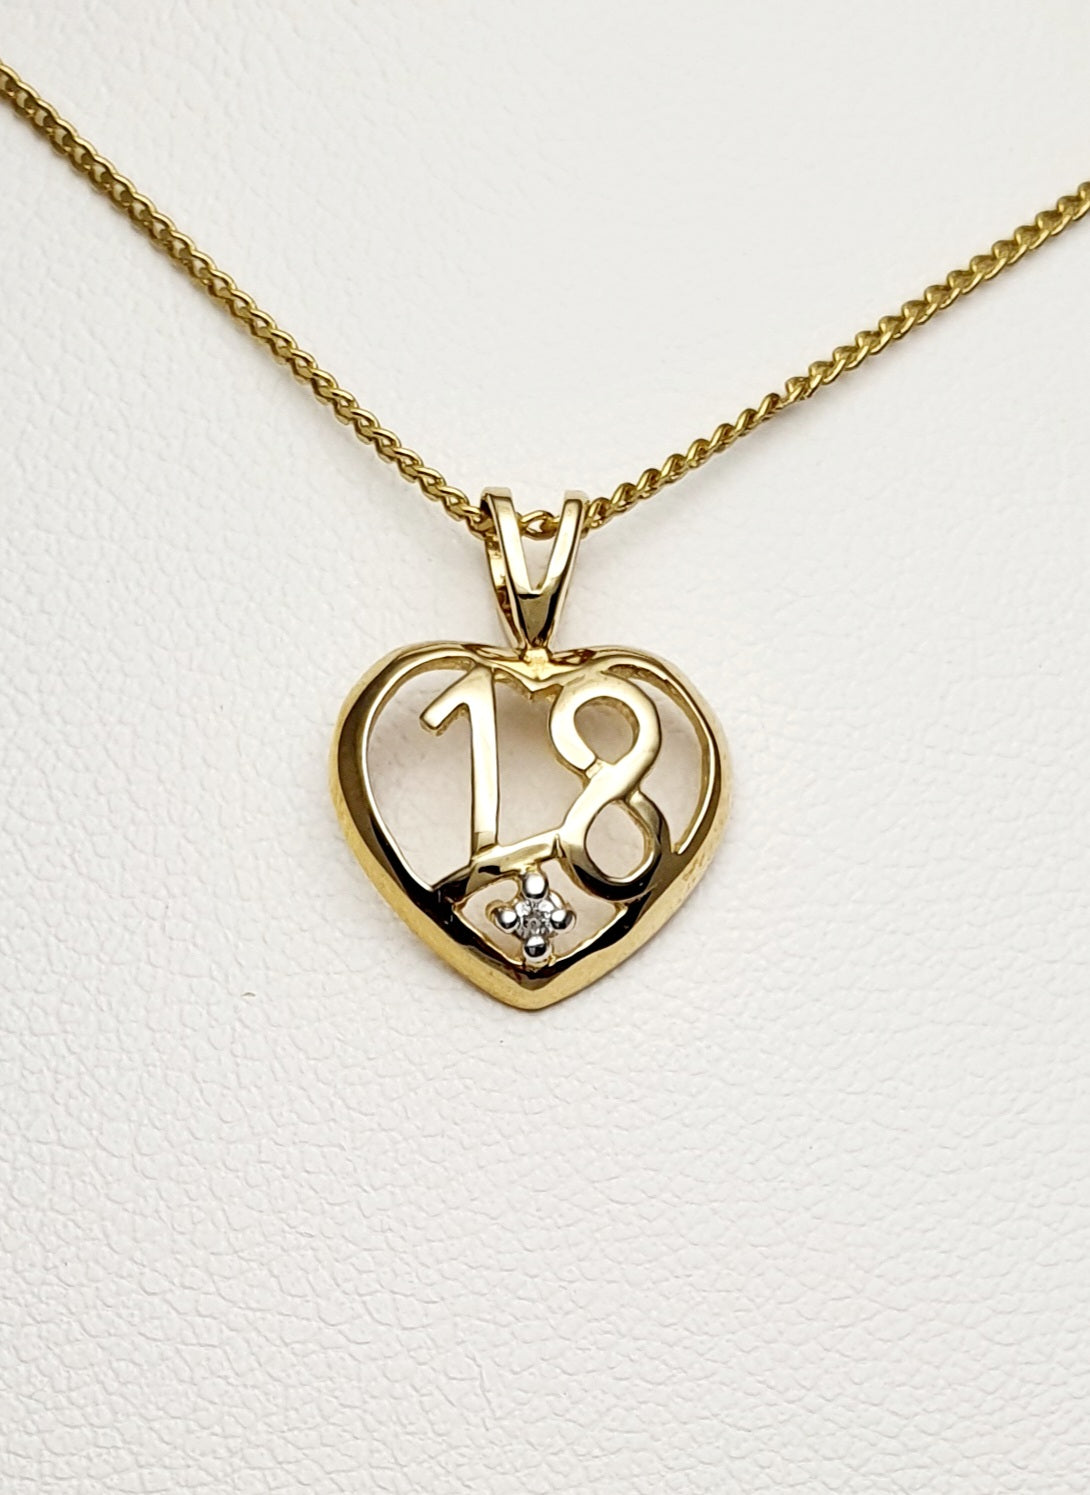 9ct Yellow Gold "18" Heart Pendant set with a Diamond